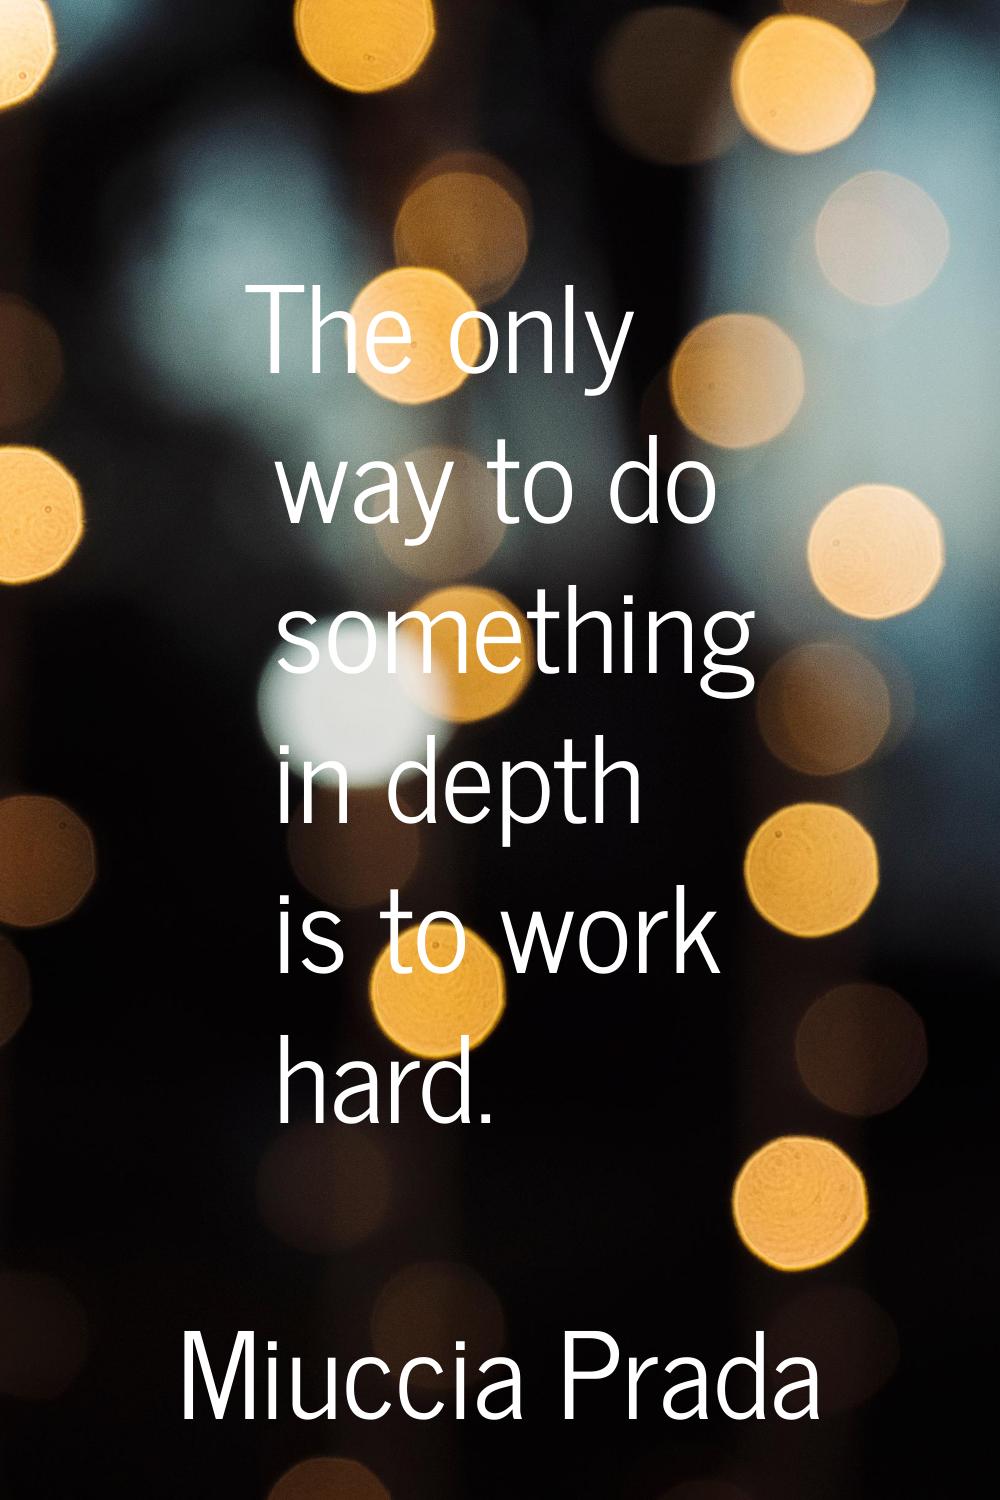 The only way to do something in depth is to work hard.